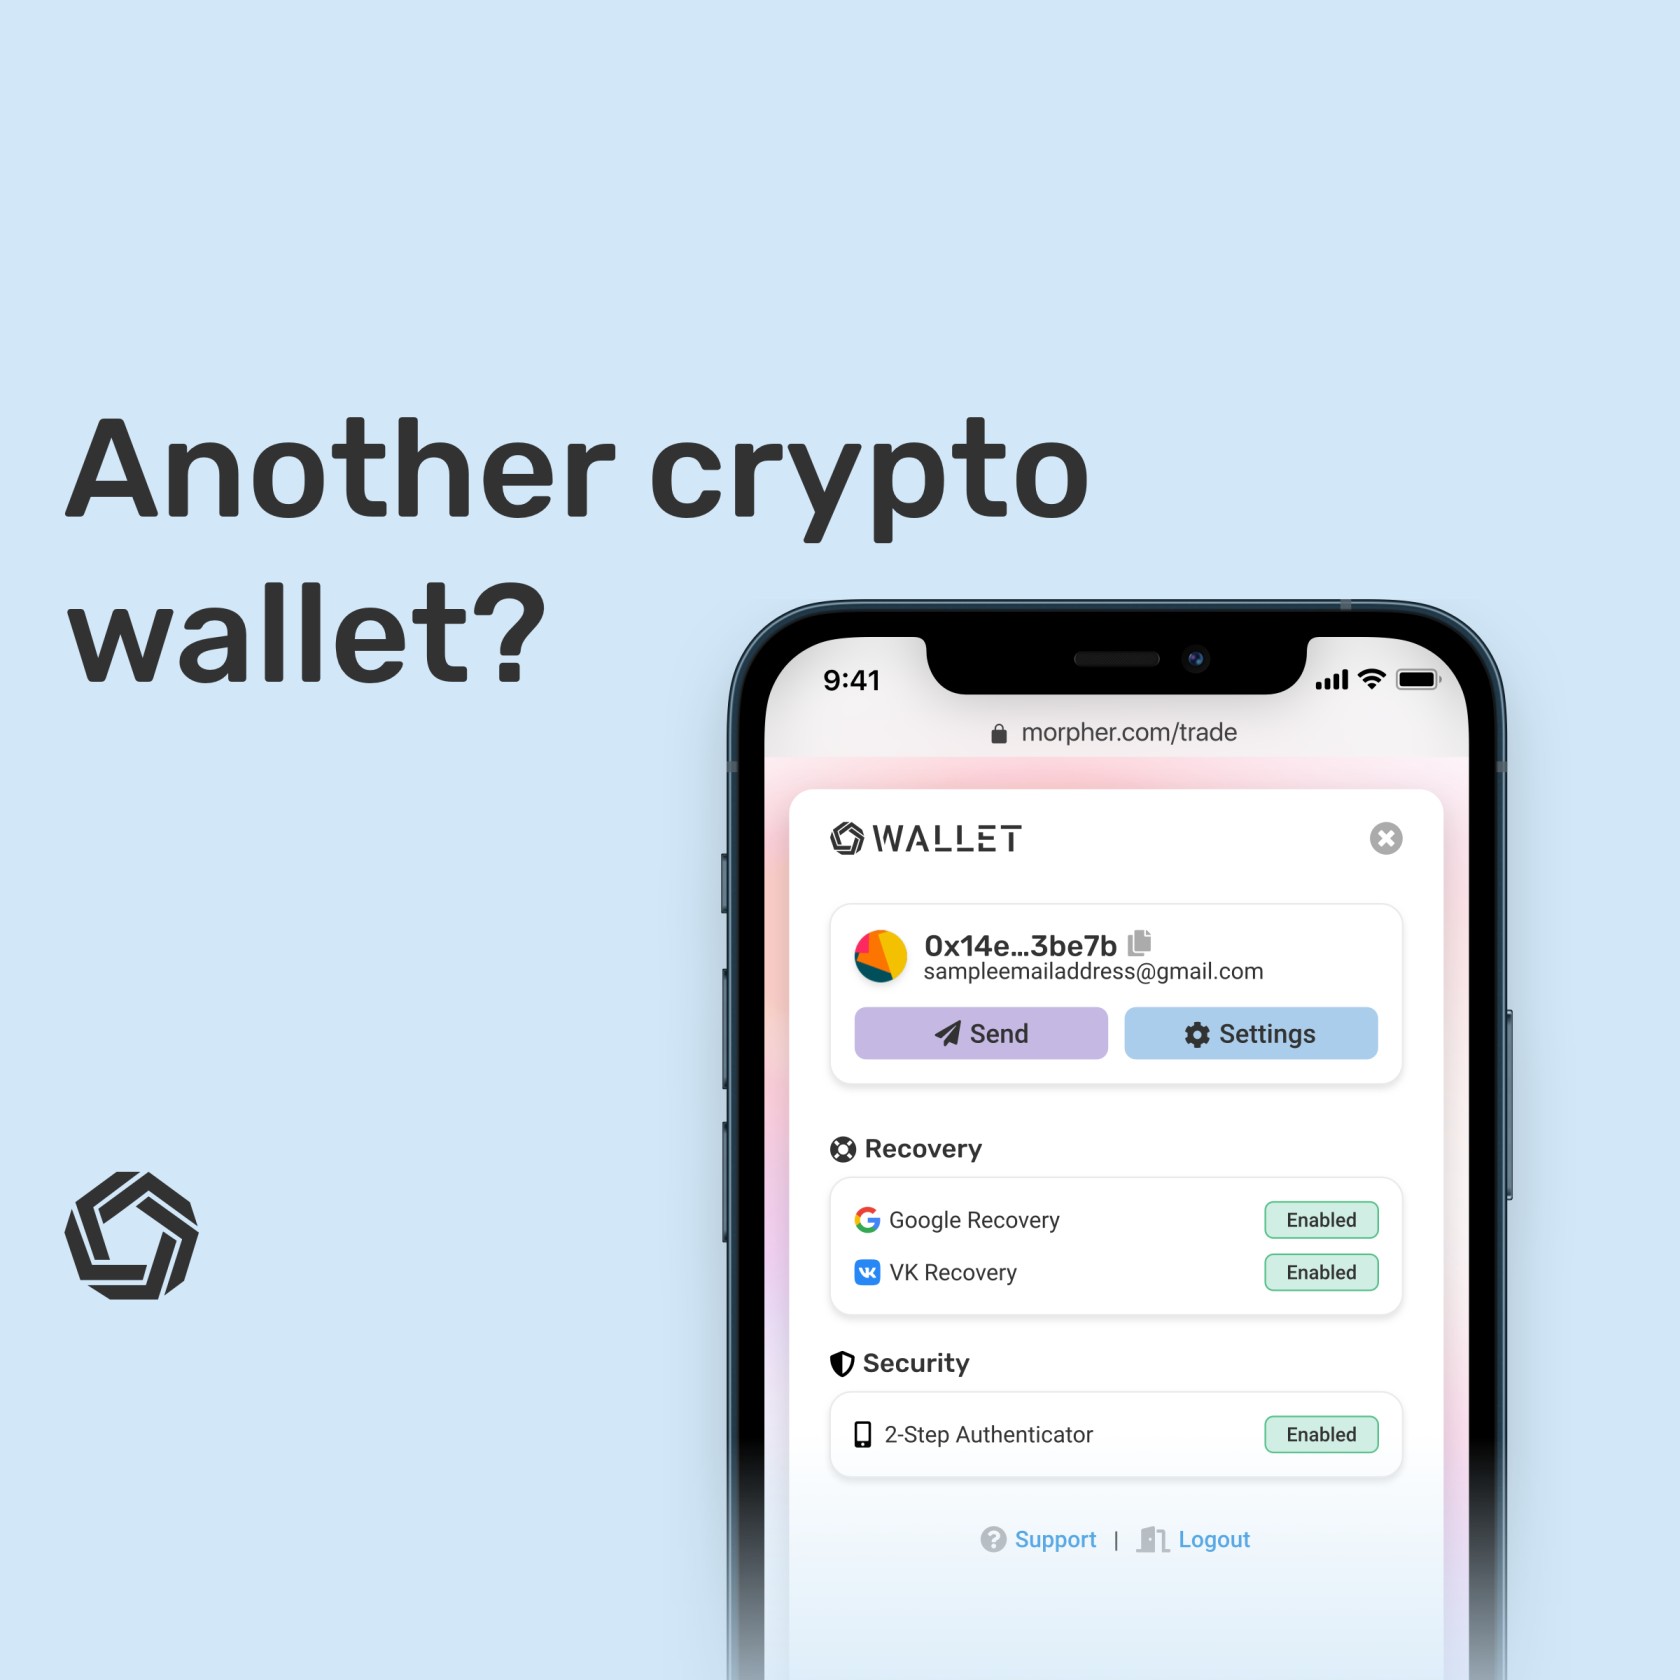 Morpher wallet on iPhone screenshot with recovery and security options. Another crypto wallet?